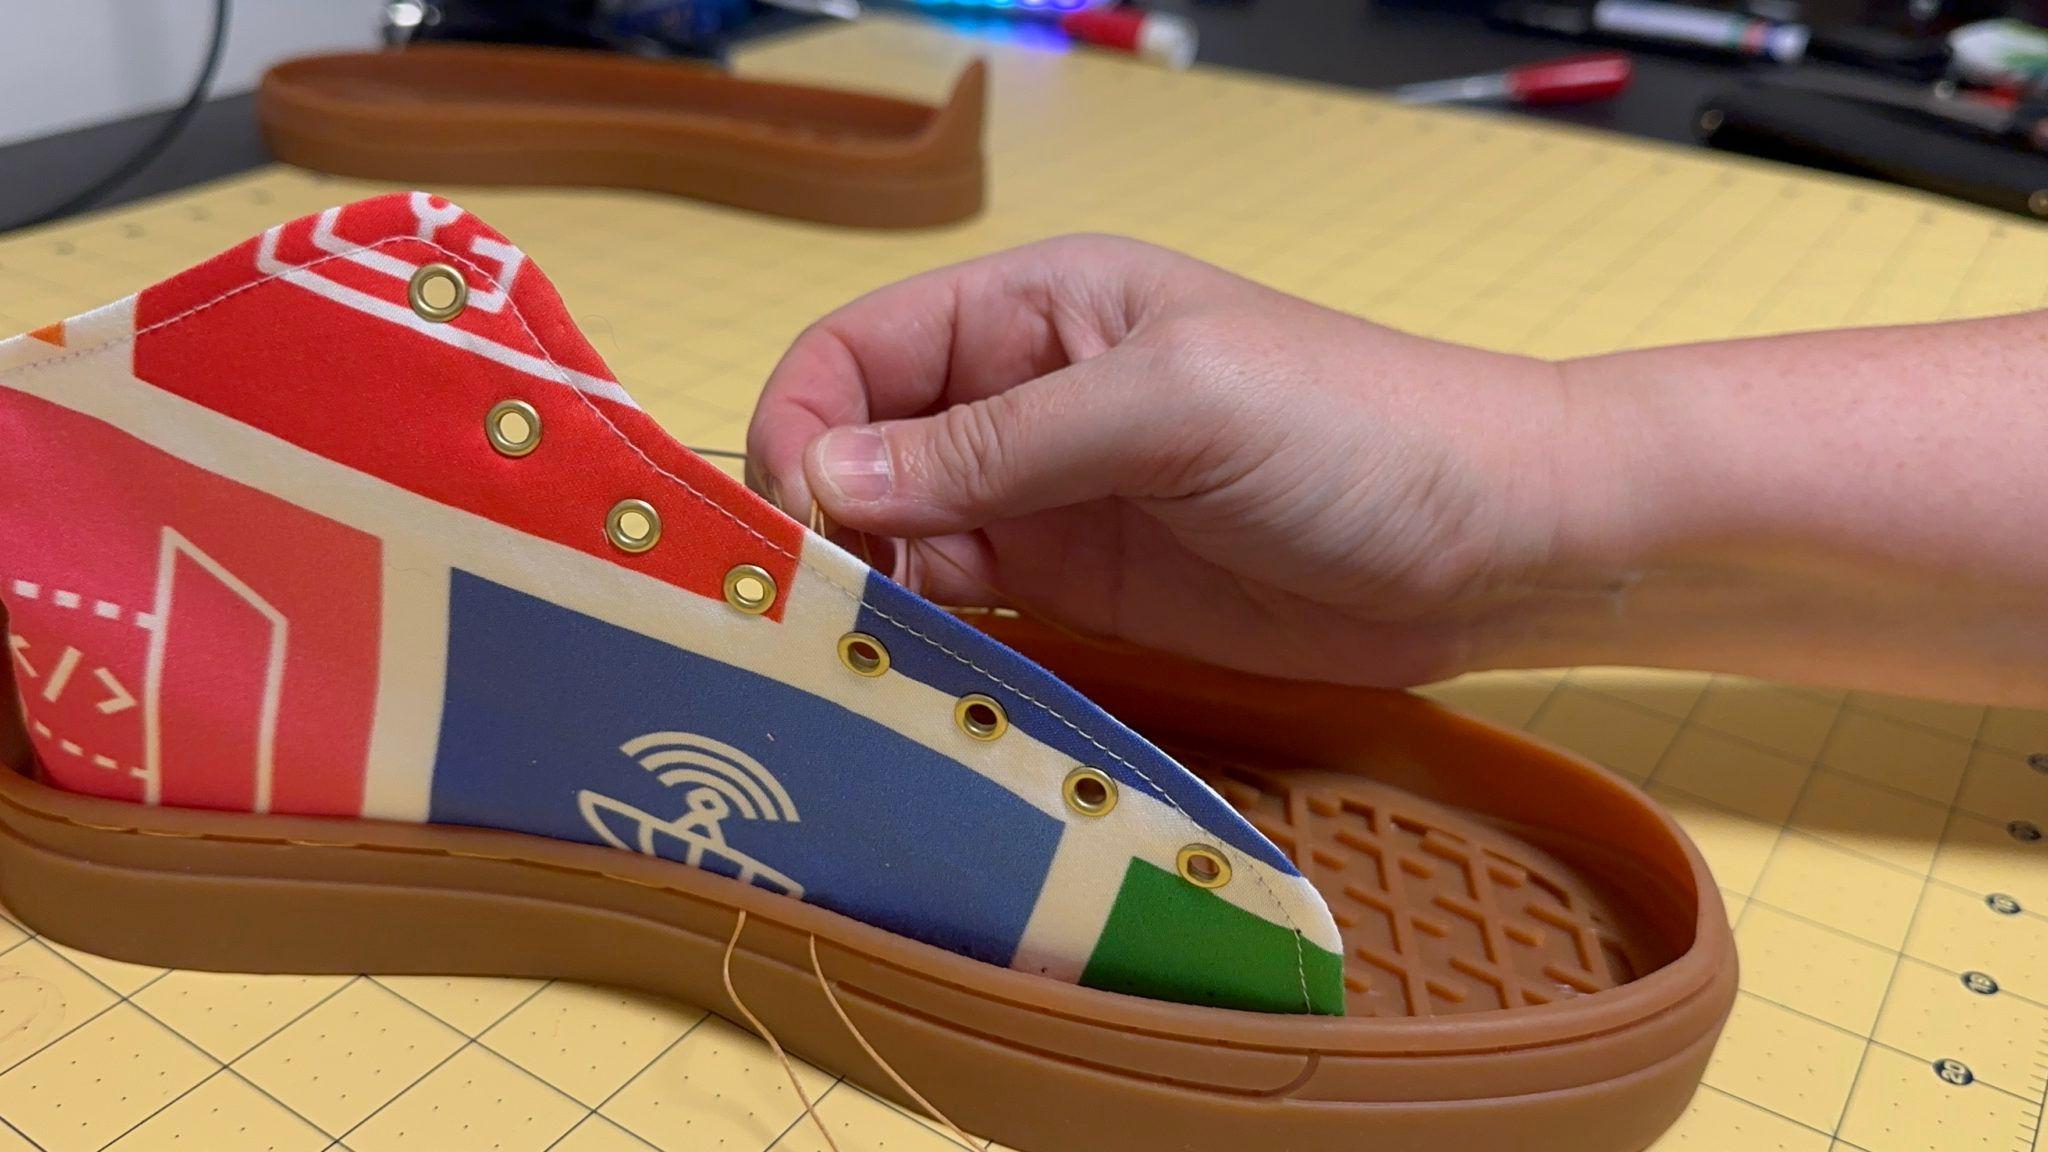 Constructing the shoes